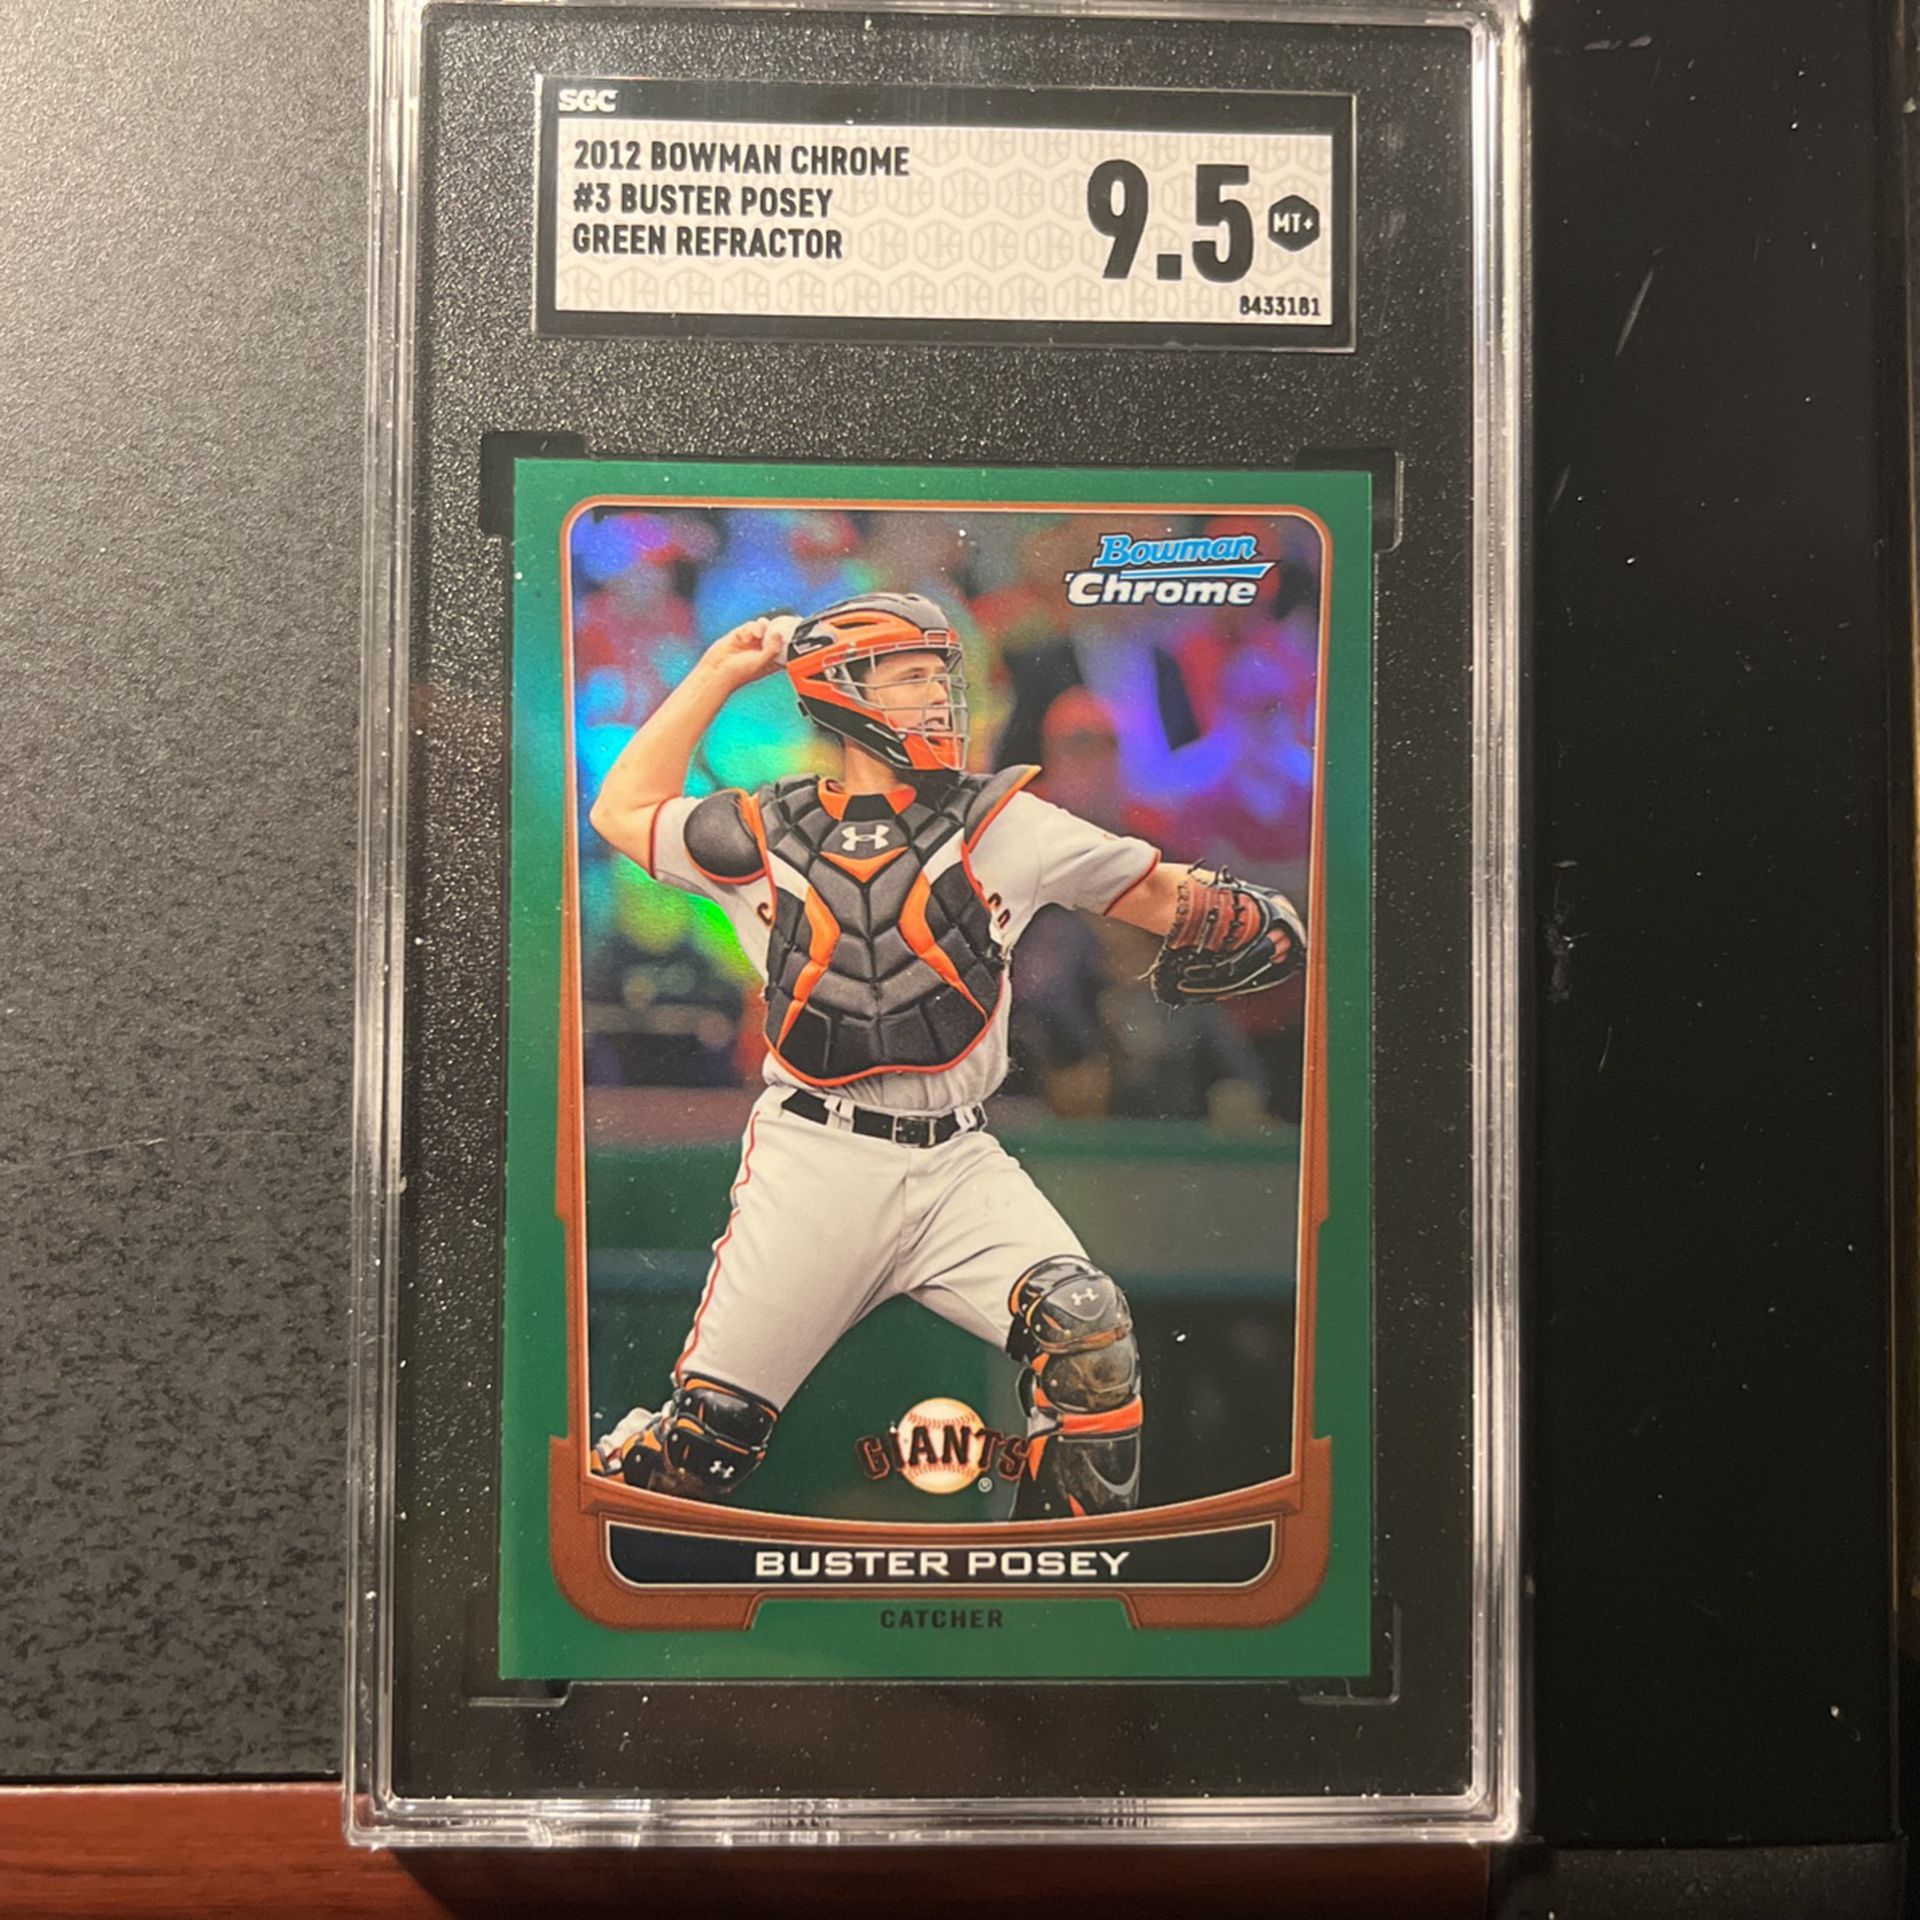 Buster Posey 2012 Green Refractor Card, Graded 9.5